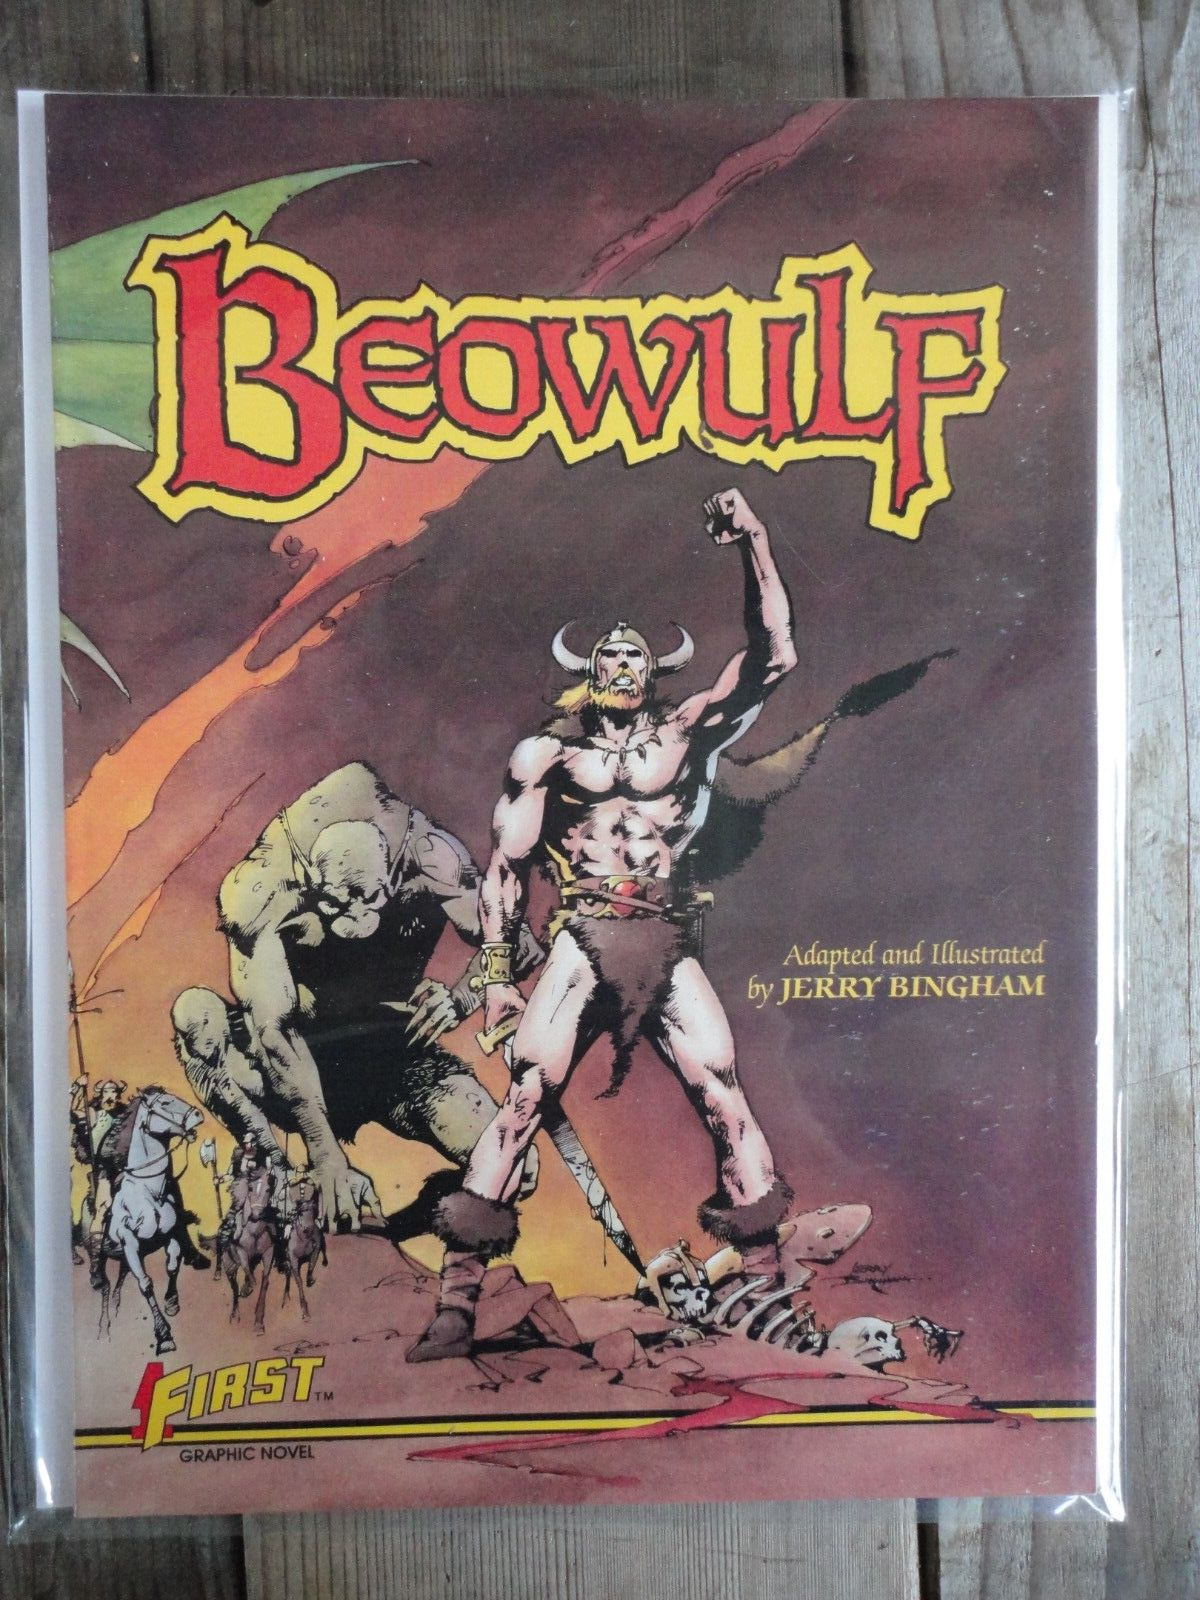 BEOWULF First Graphic Novel Illustrated by Jerry Bingham 1984 - VF/NM Unread